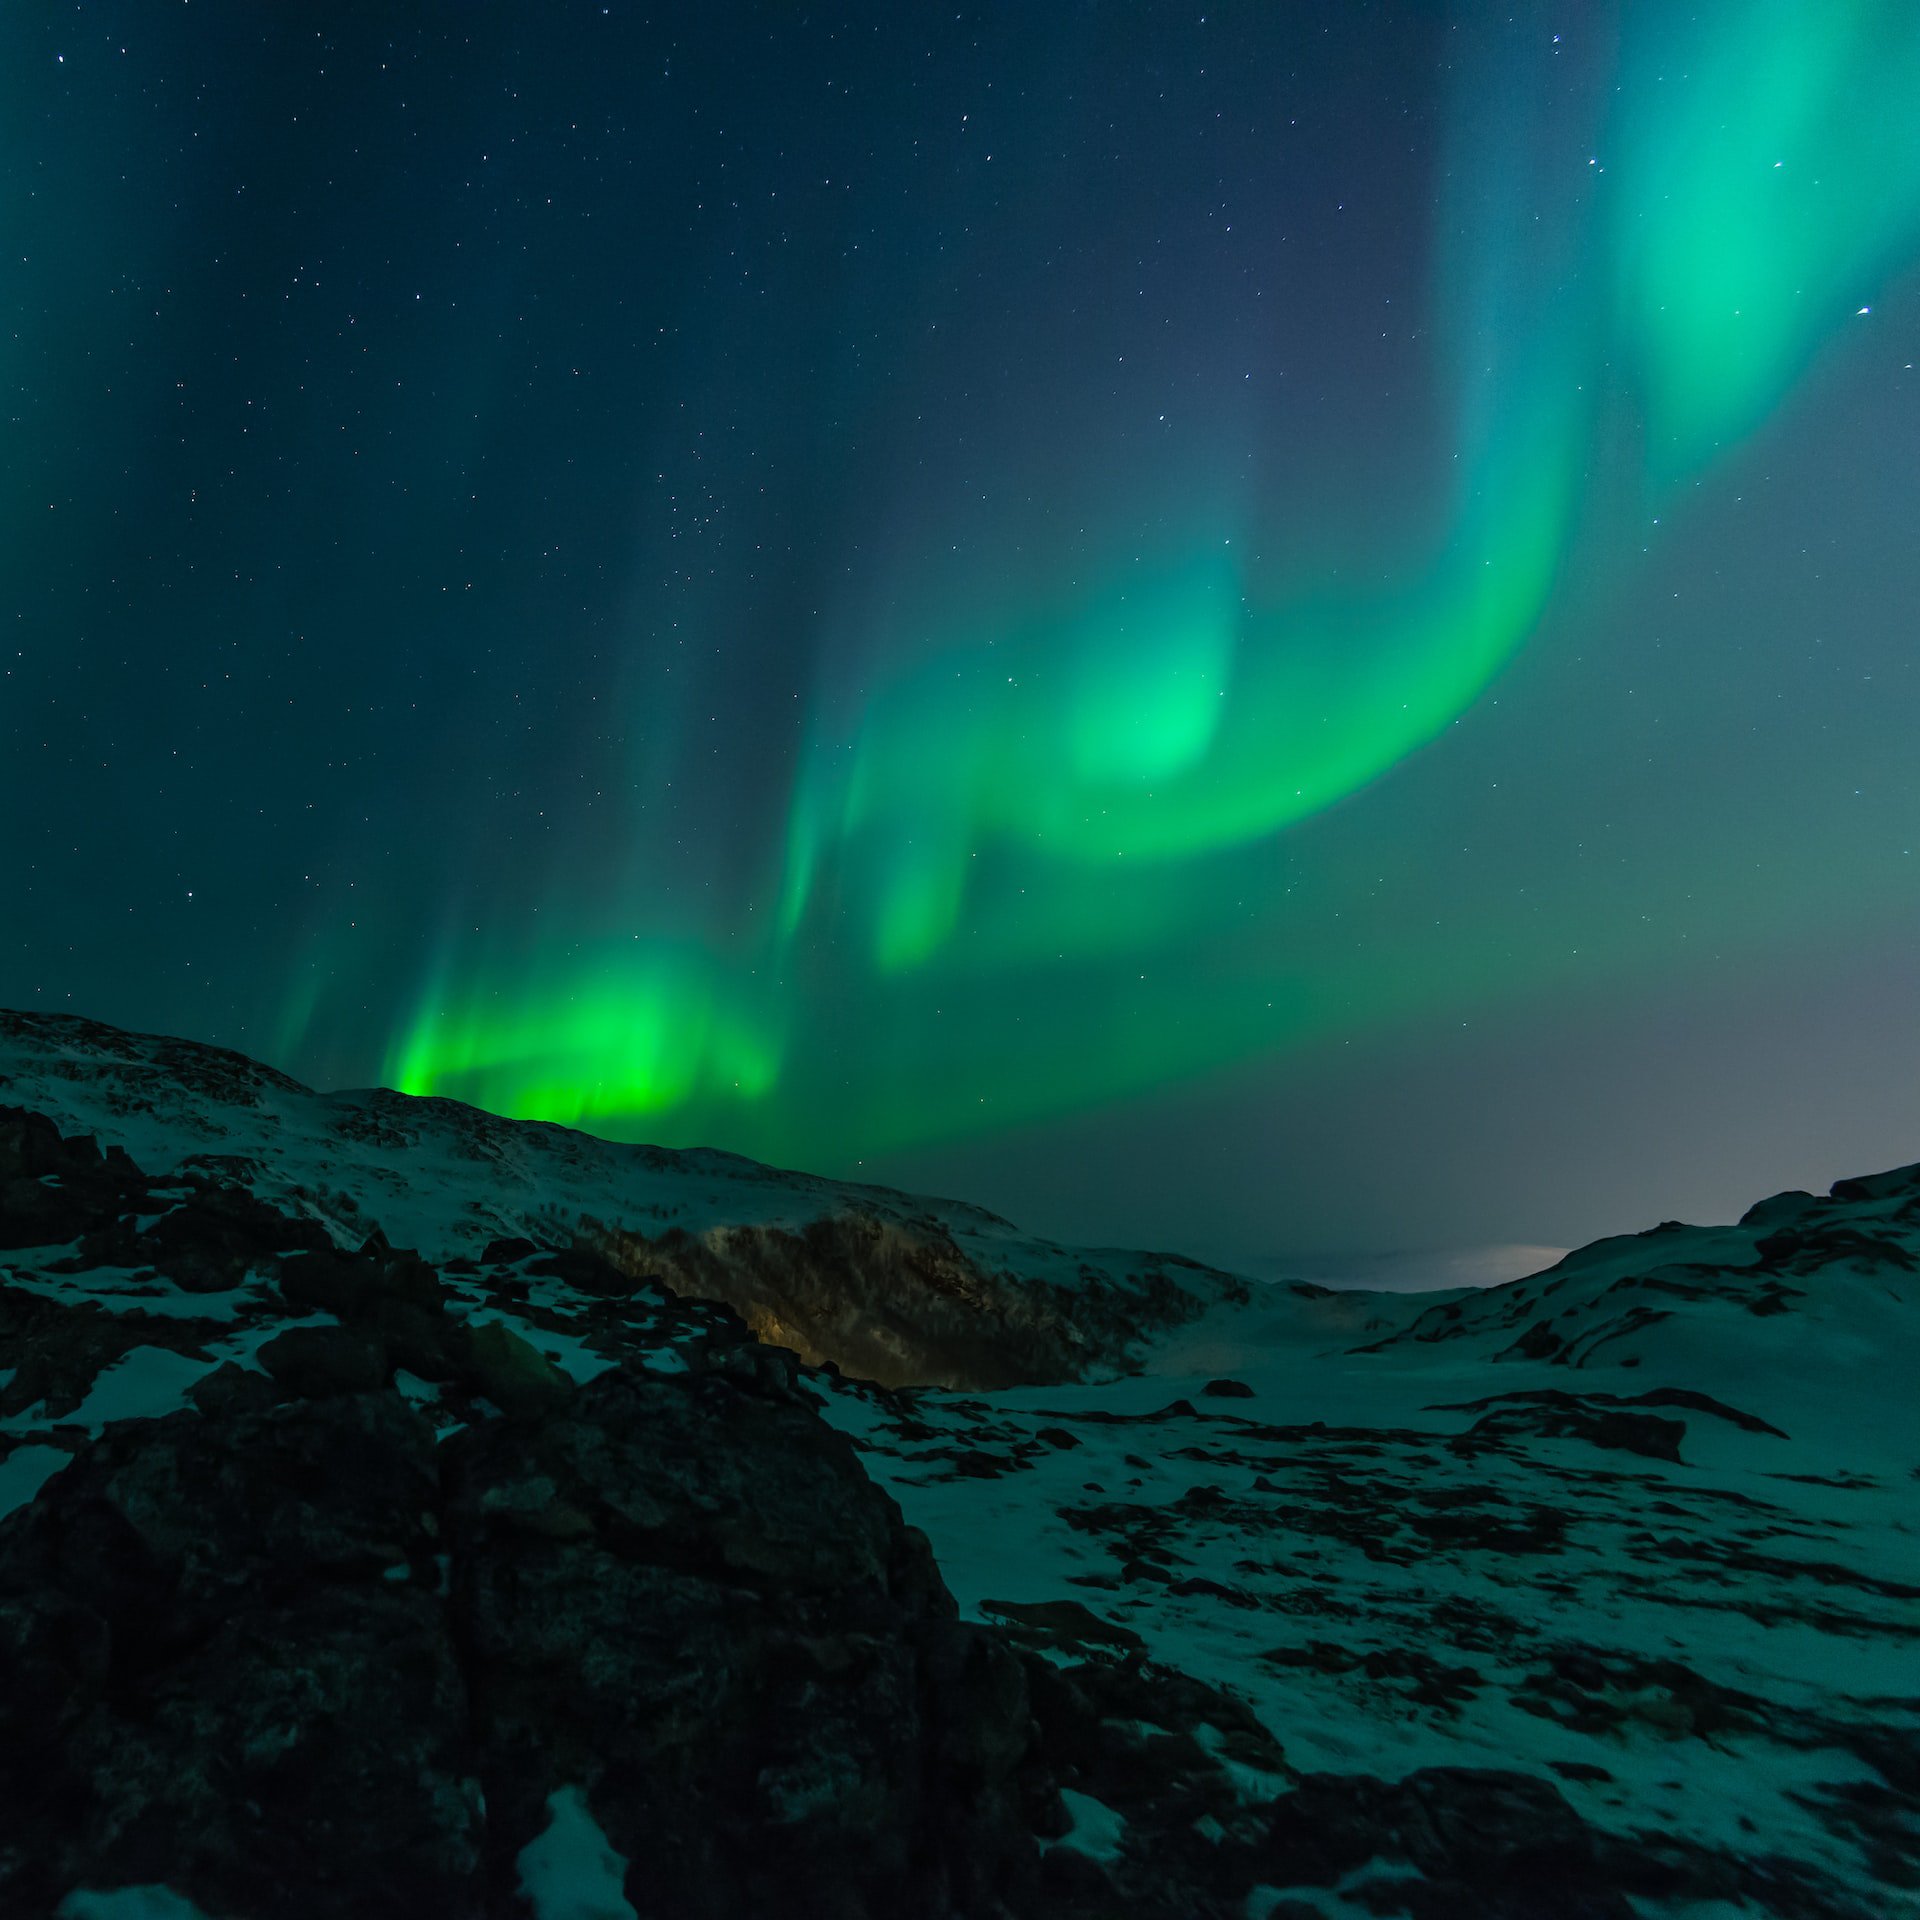 Photo of Aurora in the mountains courtesy of Unsplash.